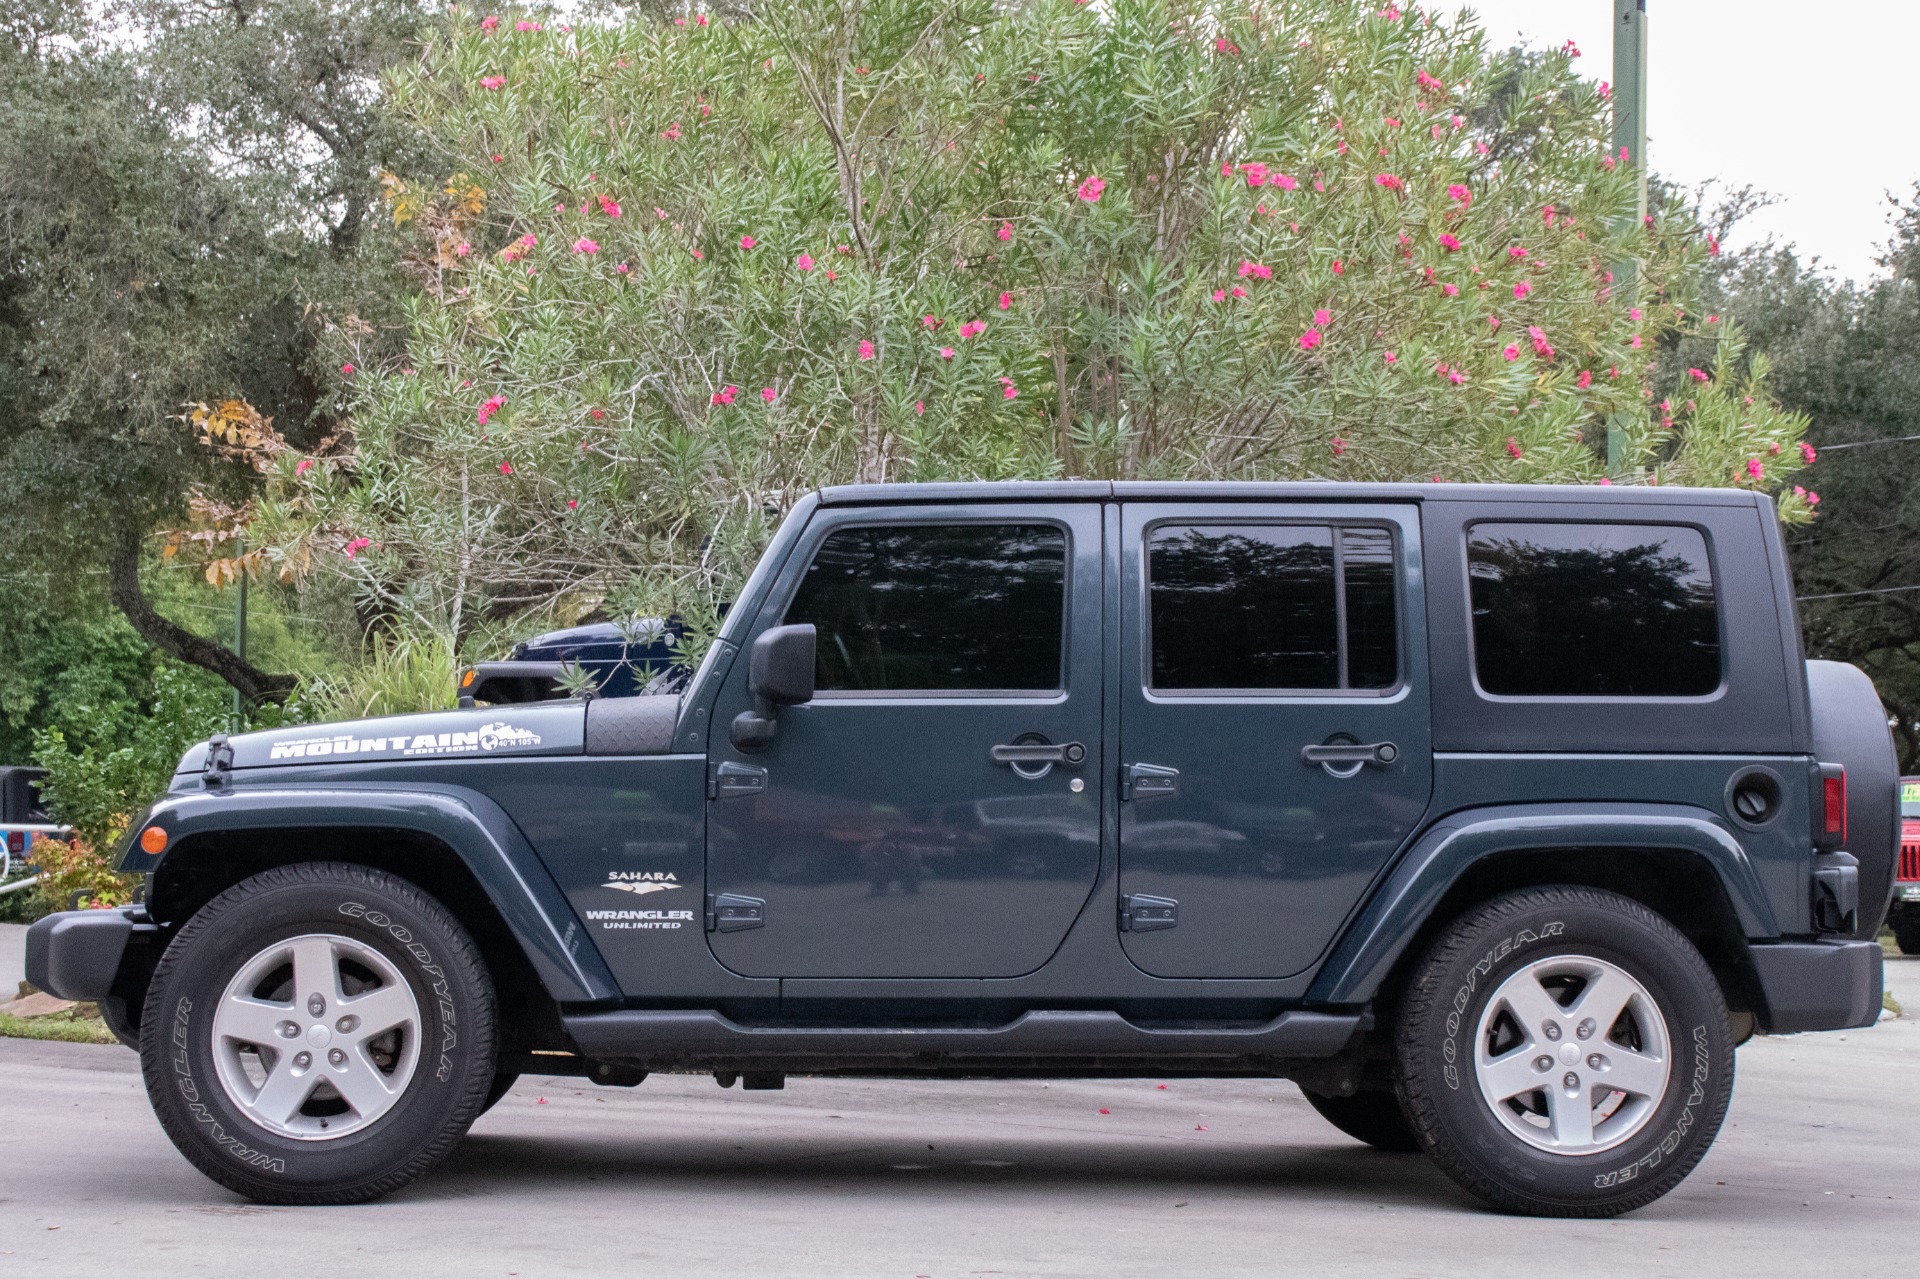 Used 2007 Jeep Wrangler Unlimited Sahara For Sale ($17,995) | Select Jeeps  Inc. Stock #142264